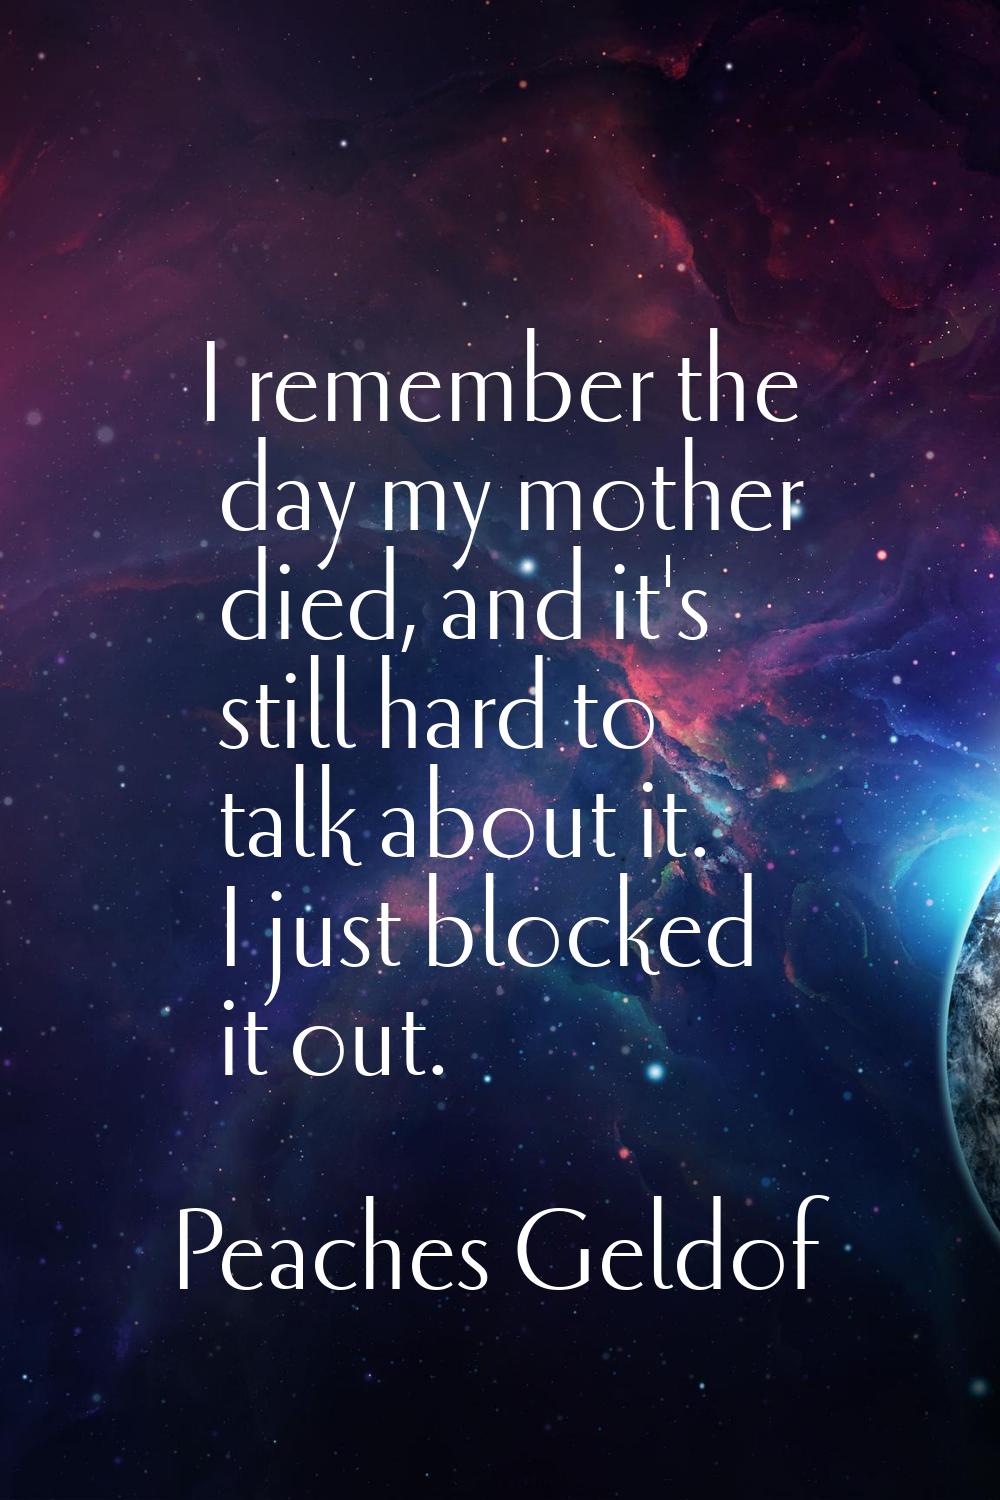 I remember the day my mother died, and it's still hard to talk about it. I just blocked it out.